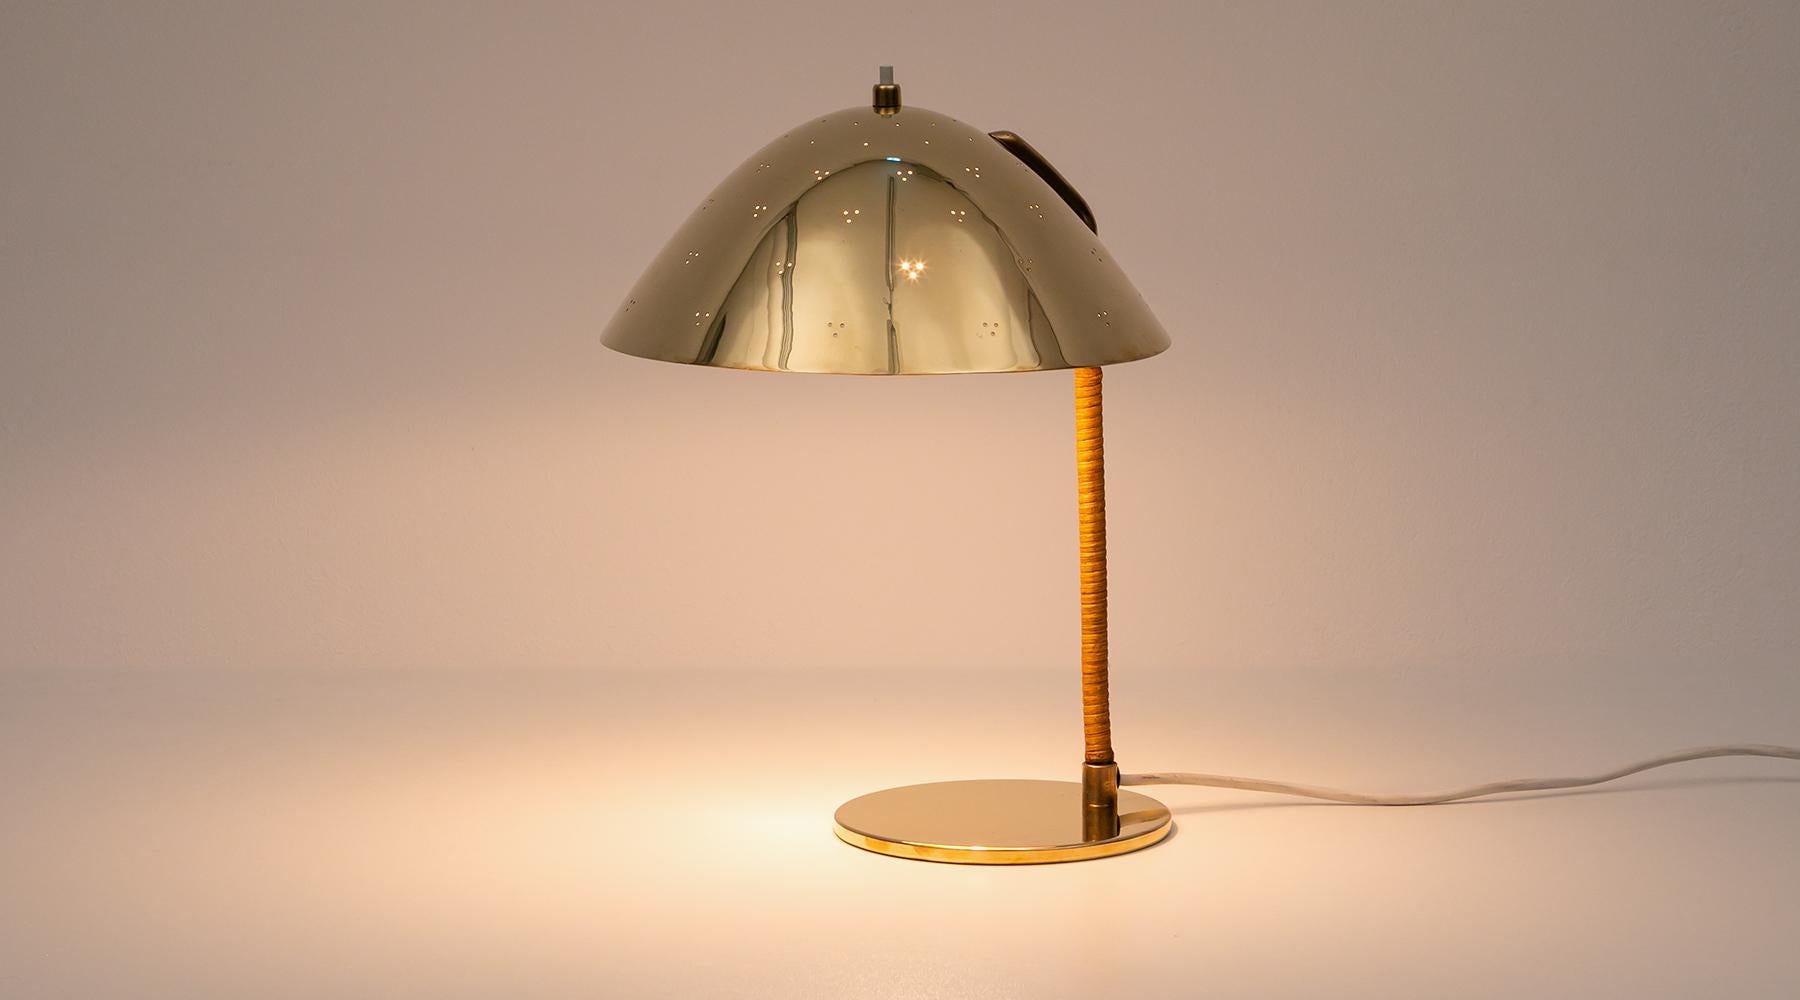 Rare and lovely table lamp designed by famous Paavo Tynell. The shade is in brass and decorated with perforation. The stem comes covered by cane and ends in a round brass feet. Manufactured by Taito Oy. 

Tynell was one of the founders of Taito